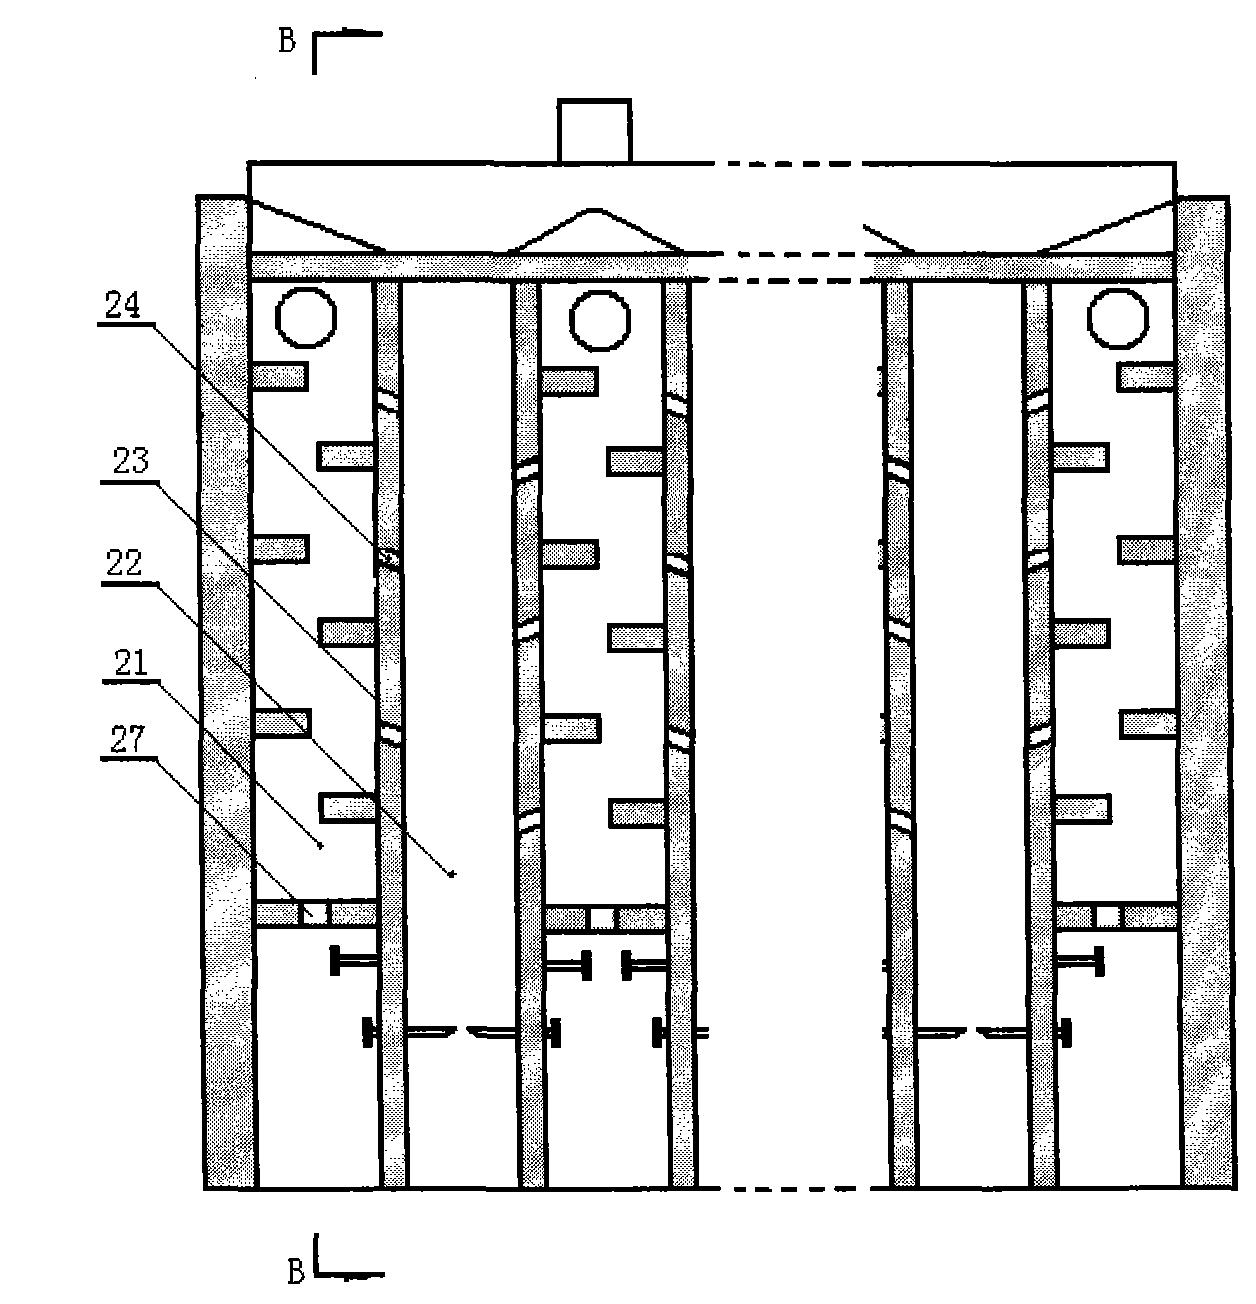 Combined firing method of active carbon and quicklime